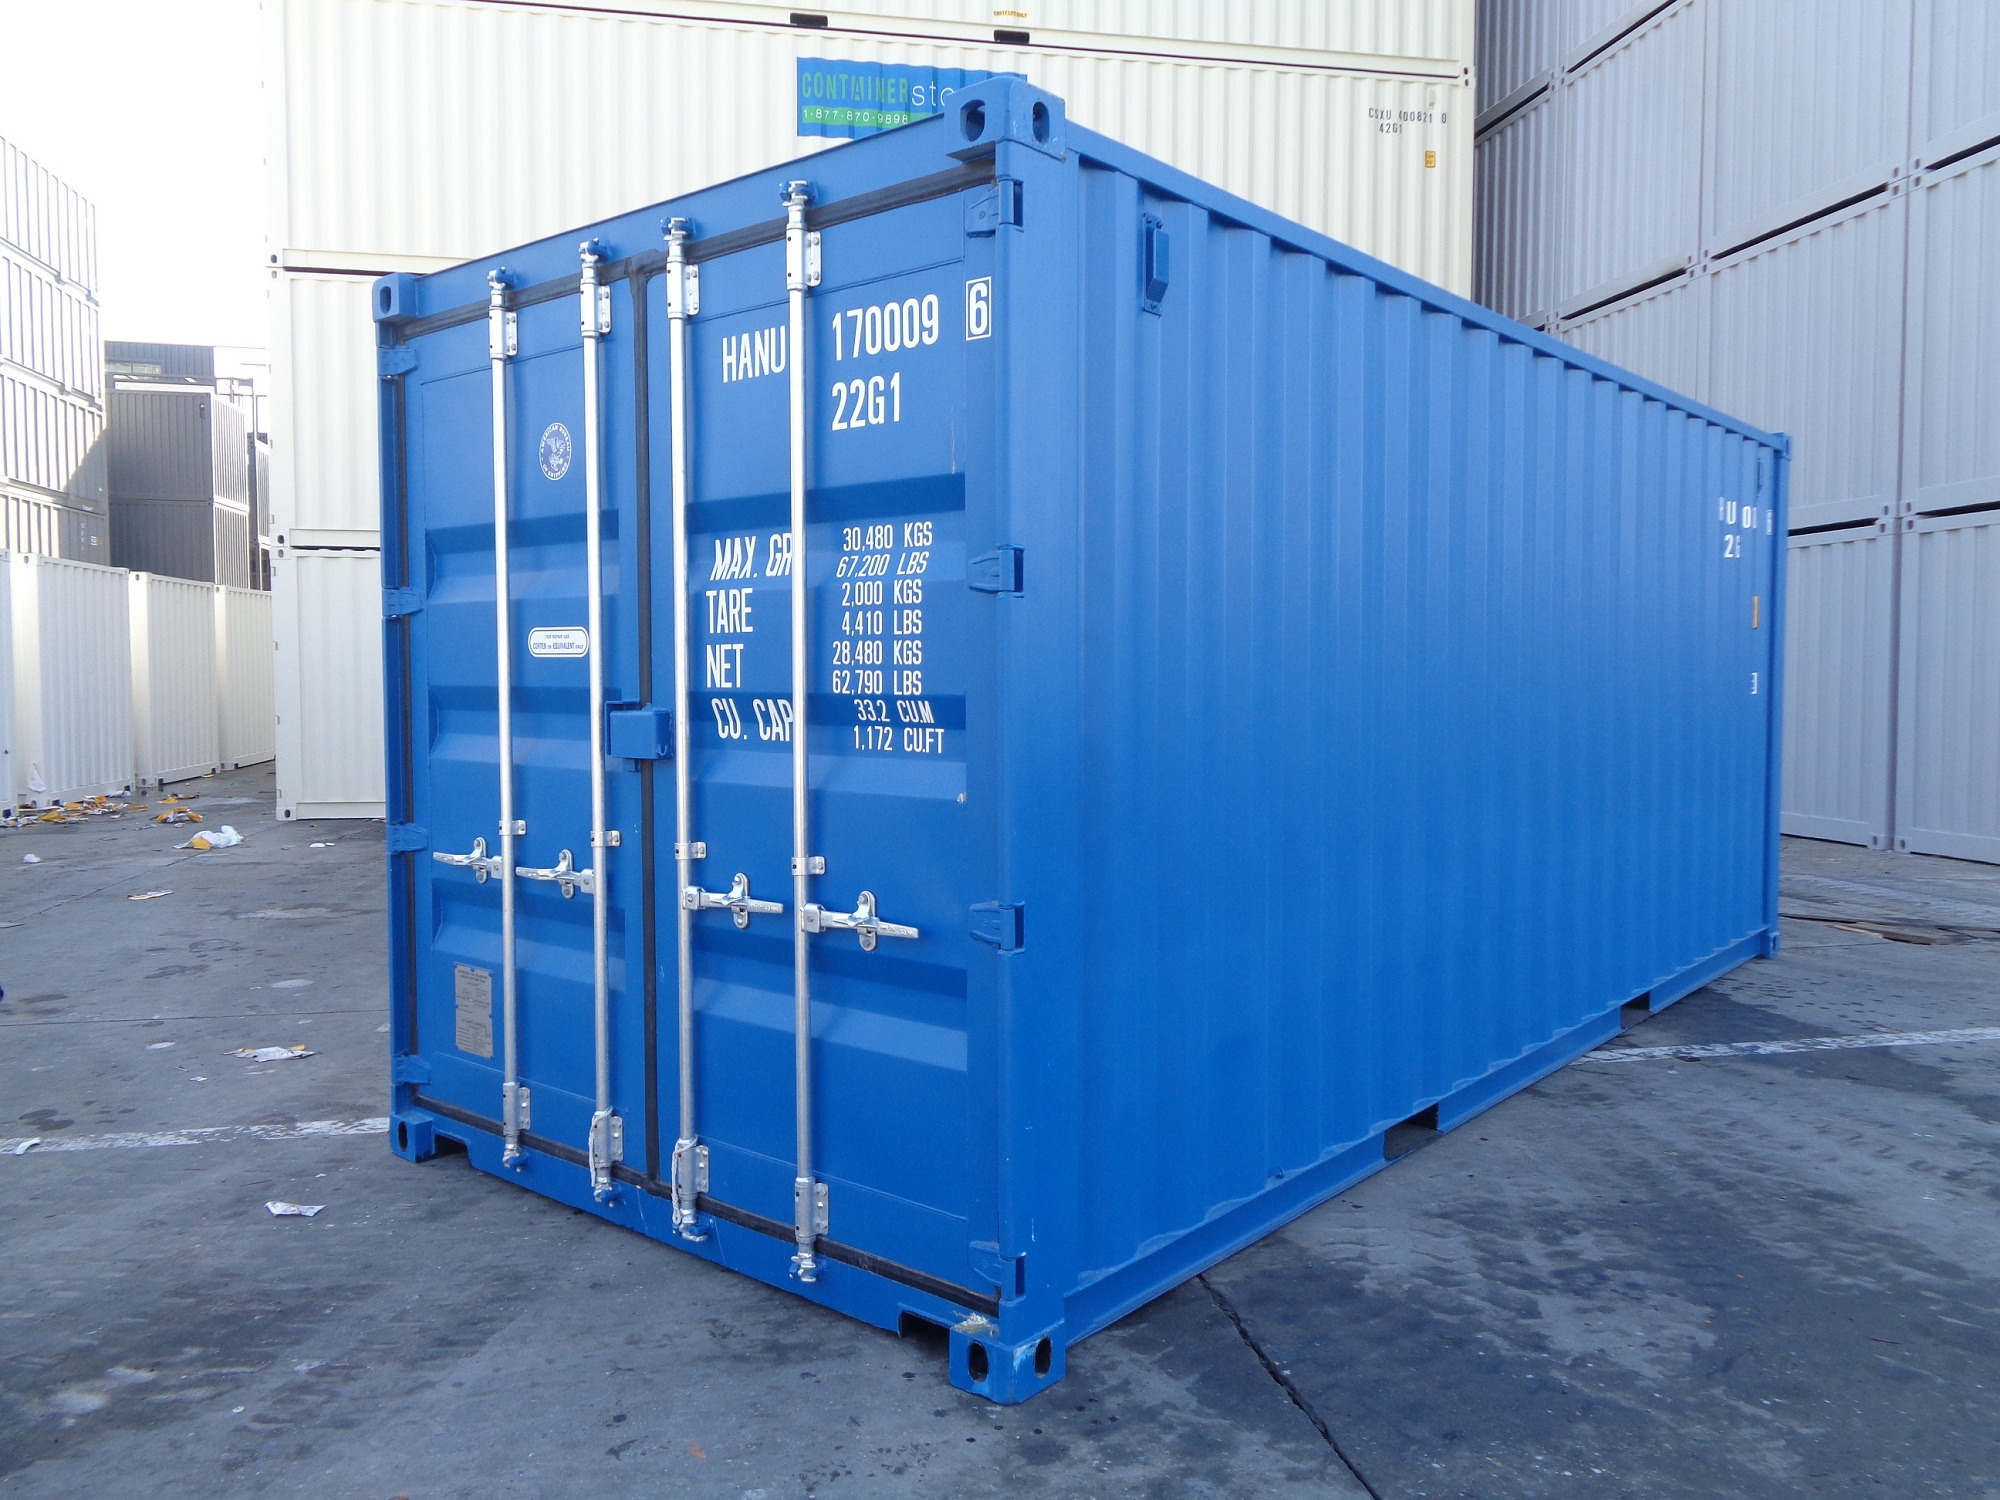 HCT Hansa Container Trading GmbH undefined: صور 4